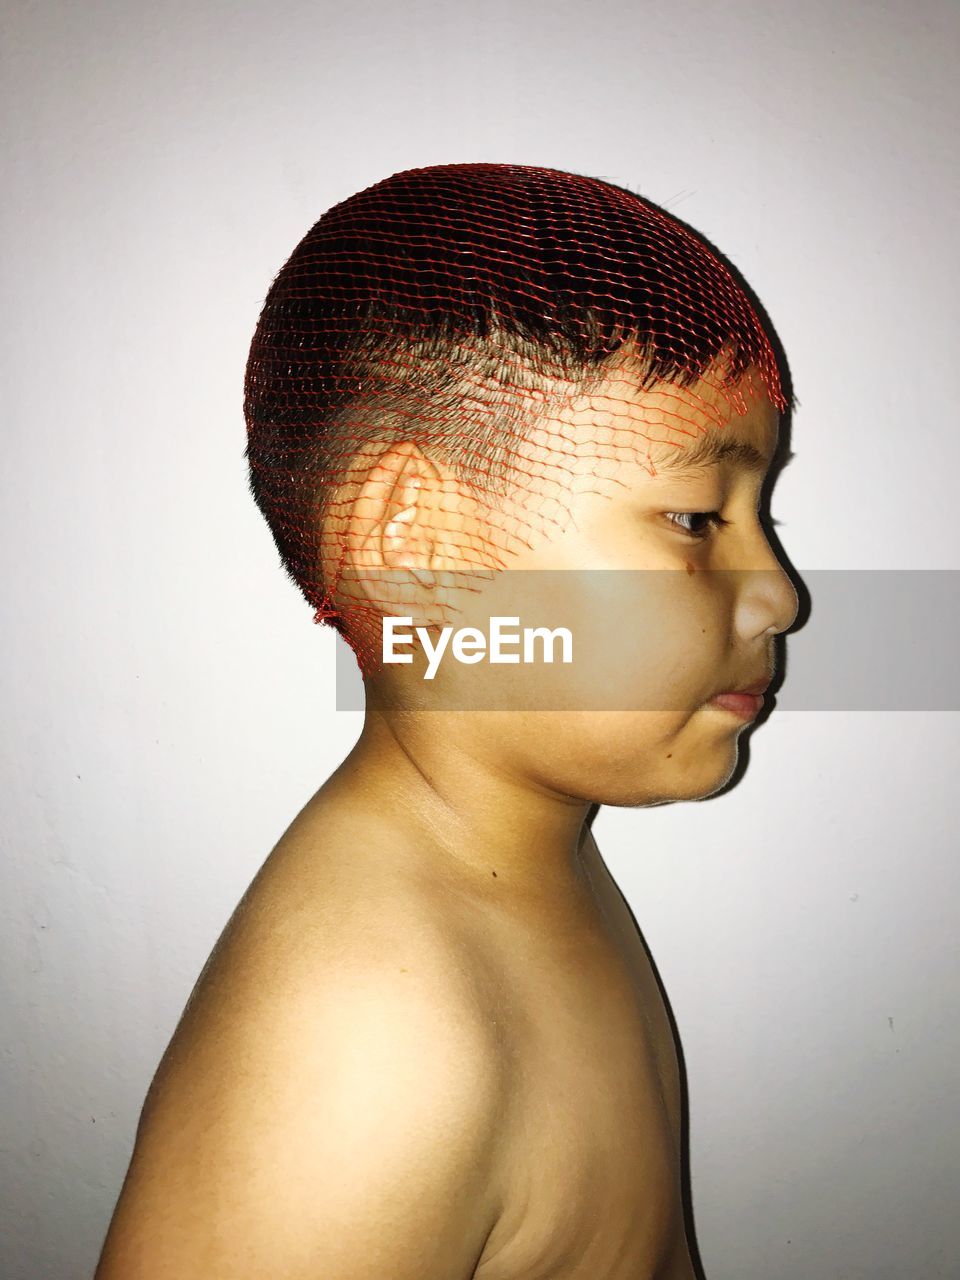 Side view of shirtless boy wearing netting on head against white wall